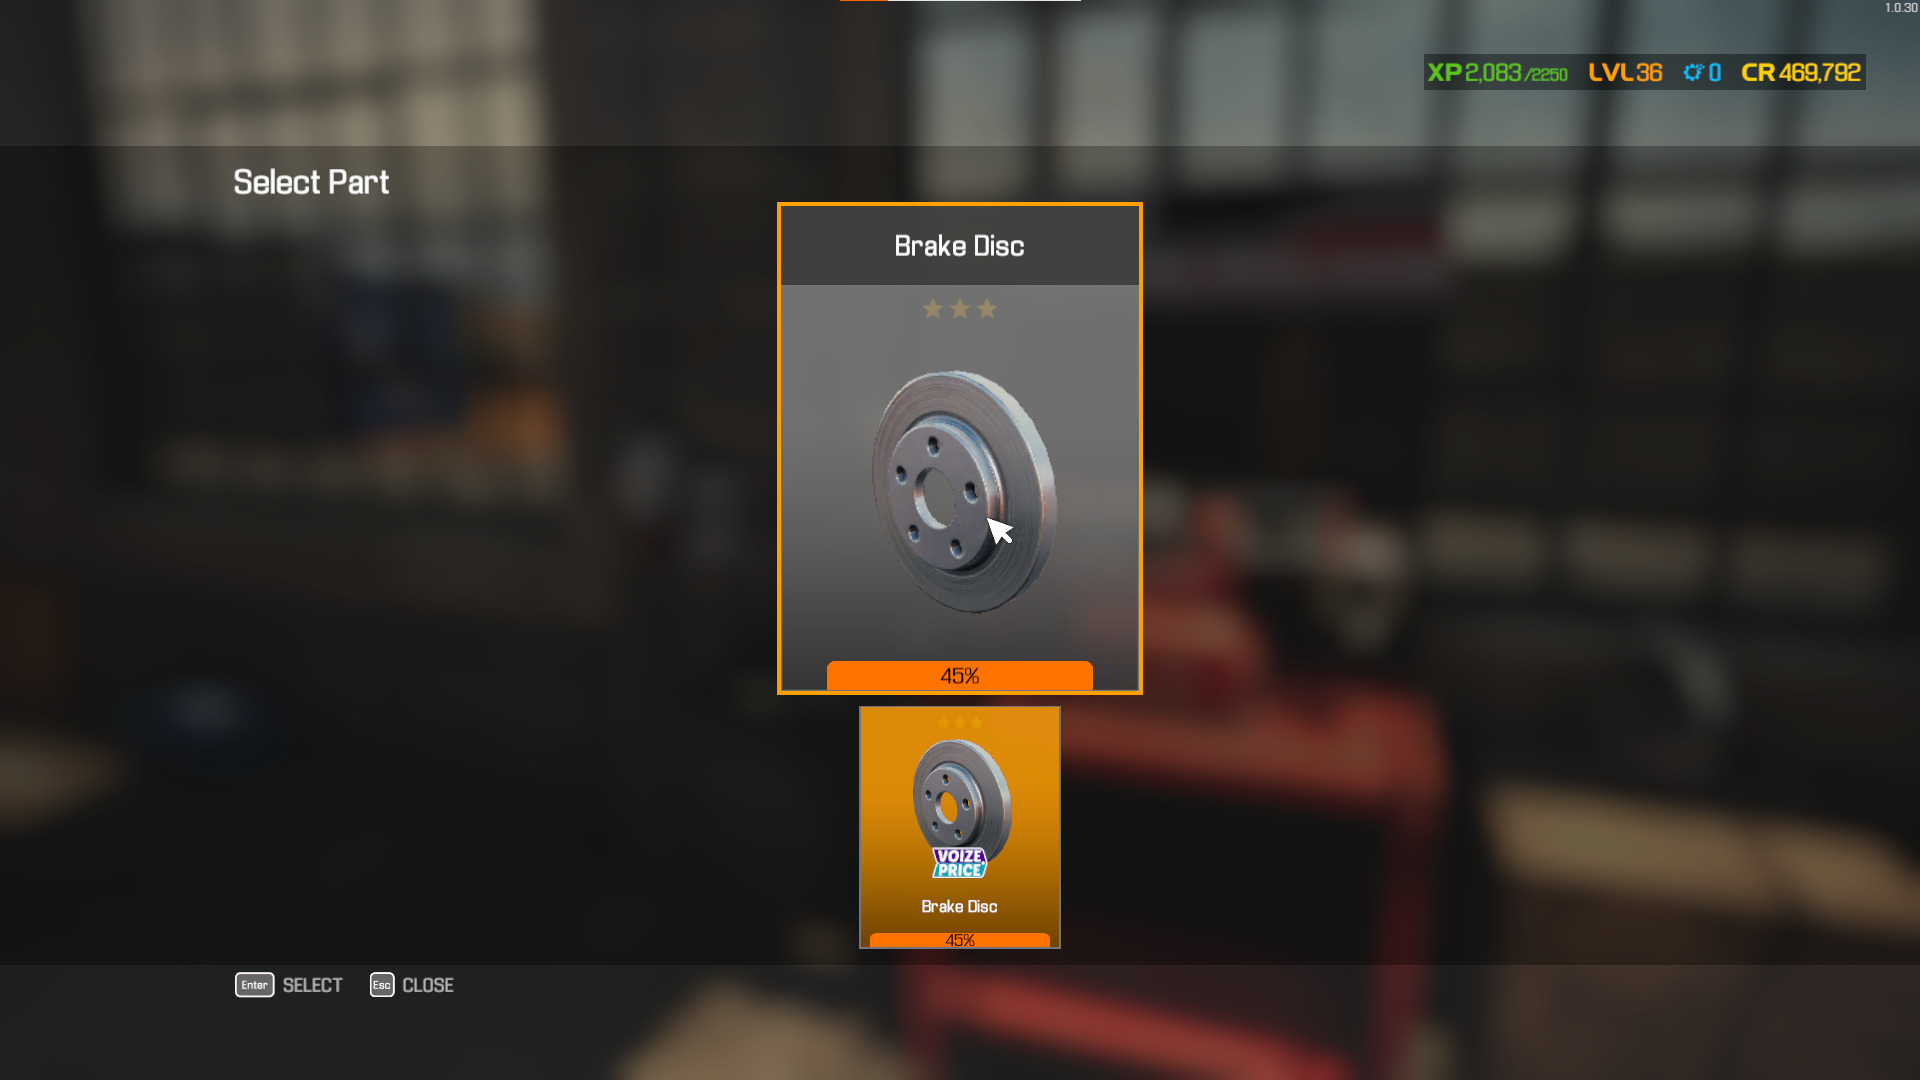 You can fix broken brake discs as long as they are at least 15% condition in Car Mechanic Simulator. 